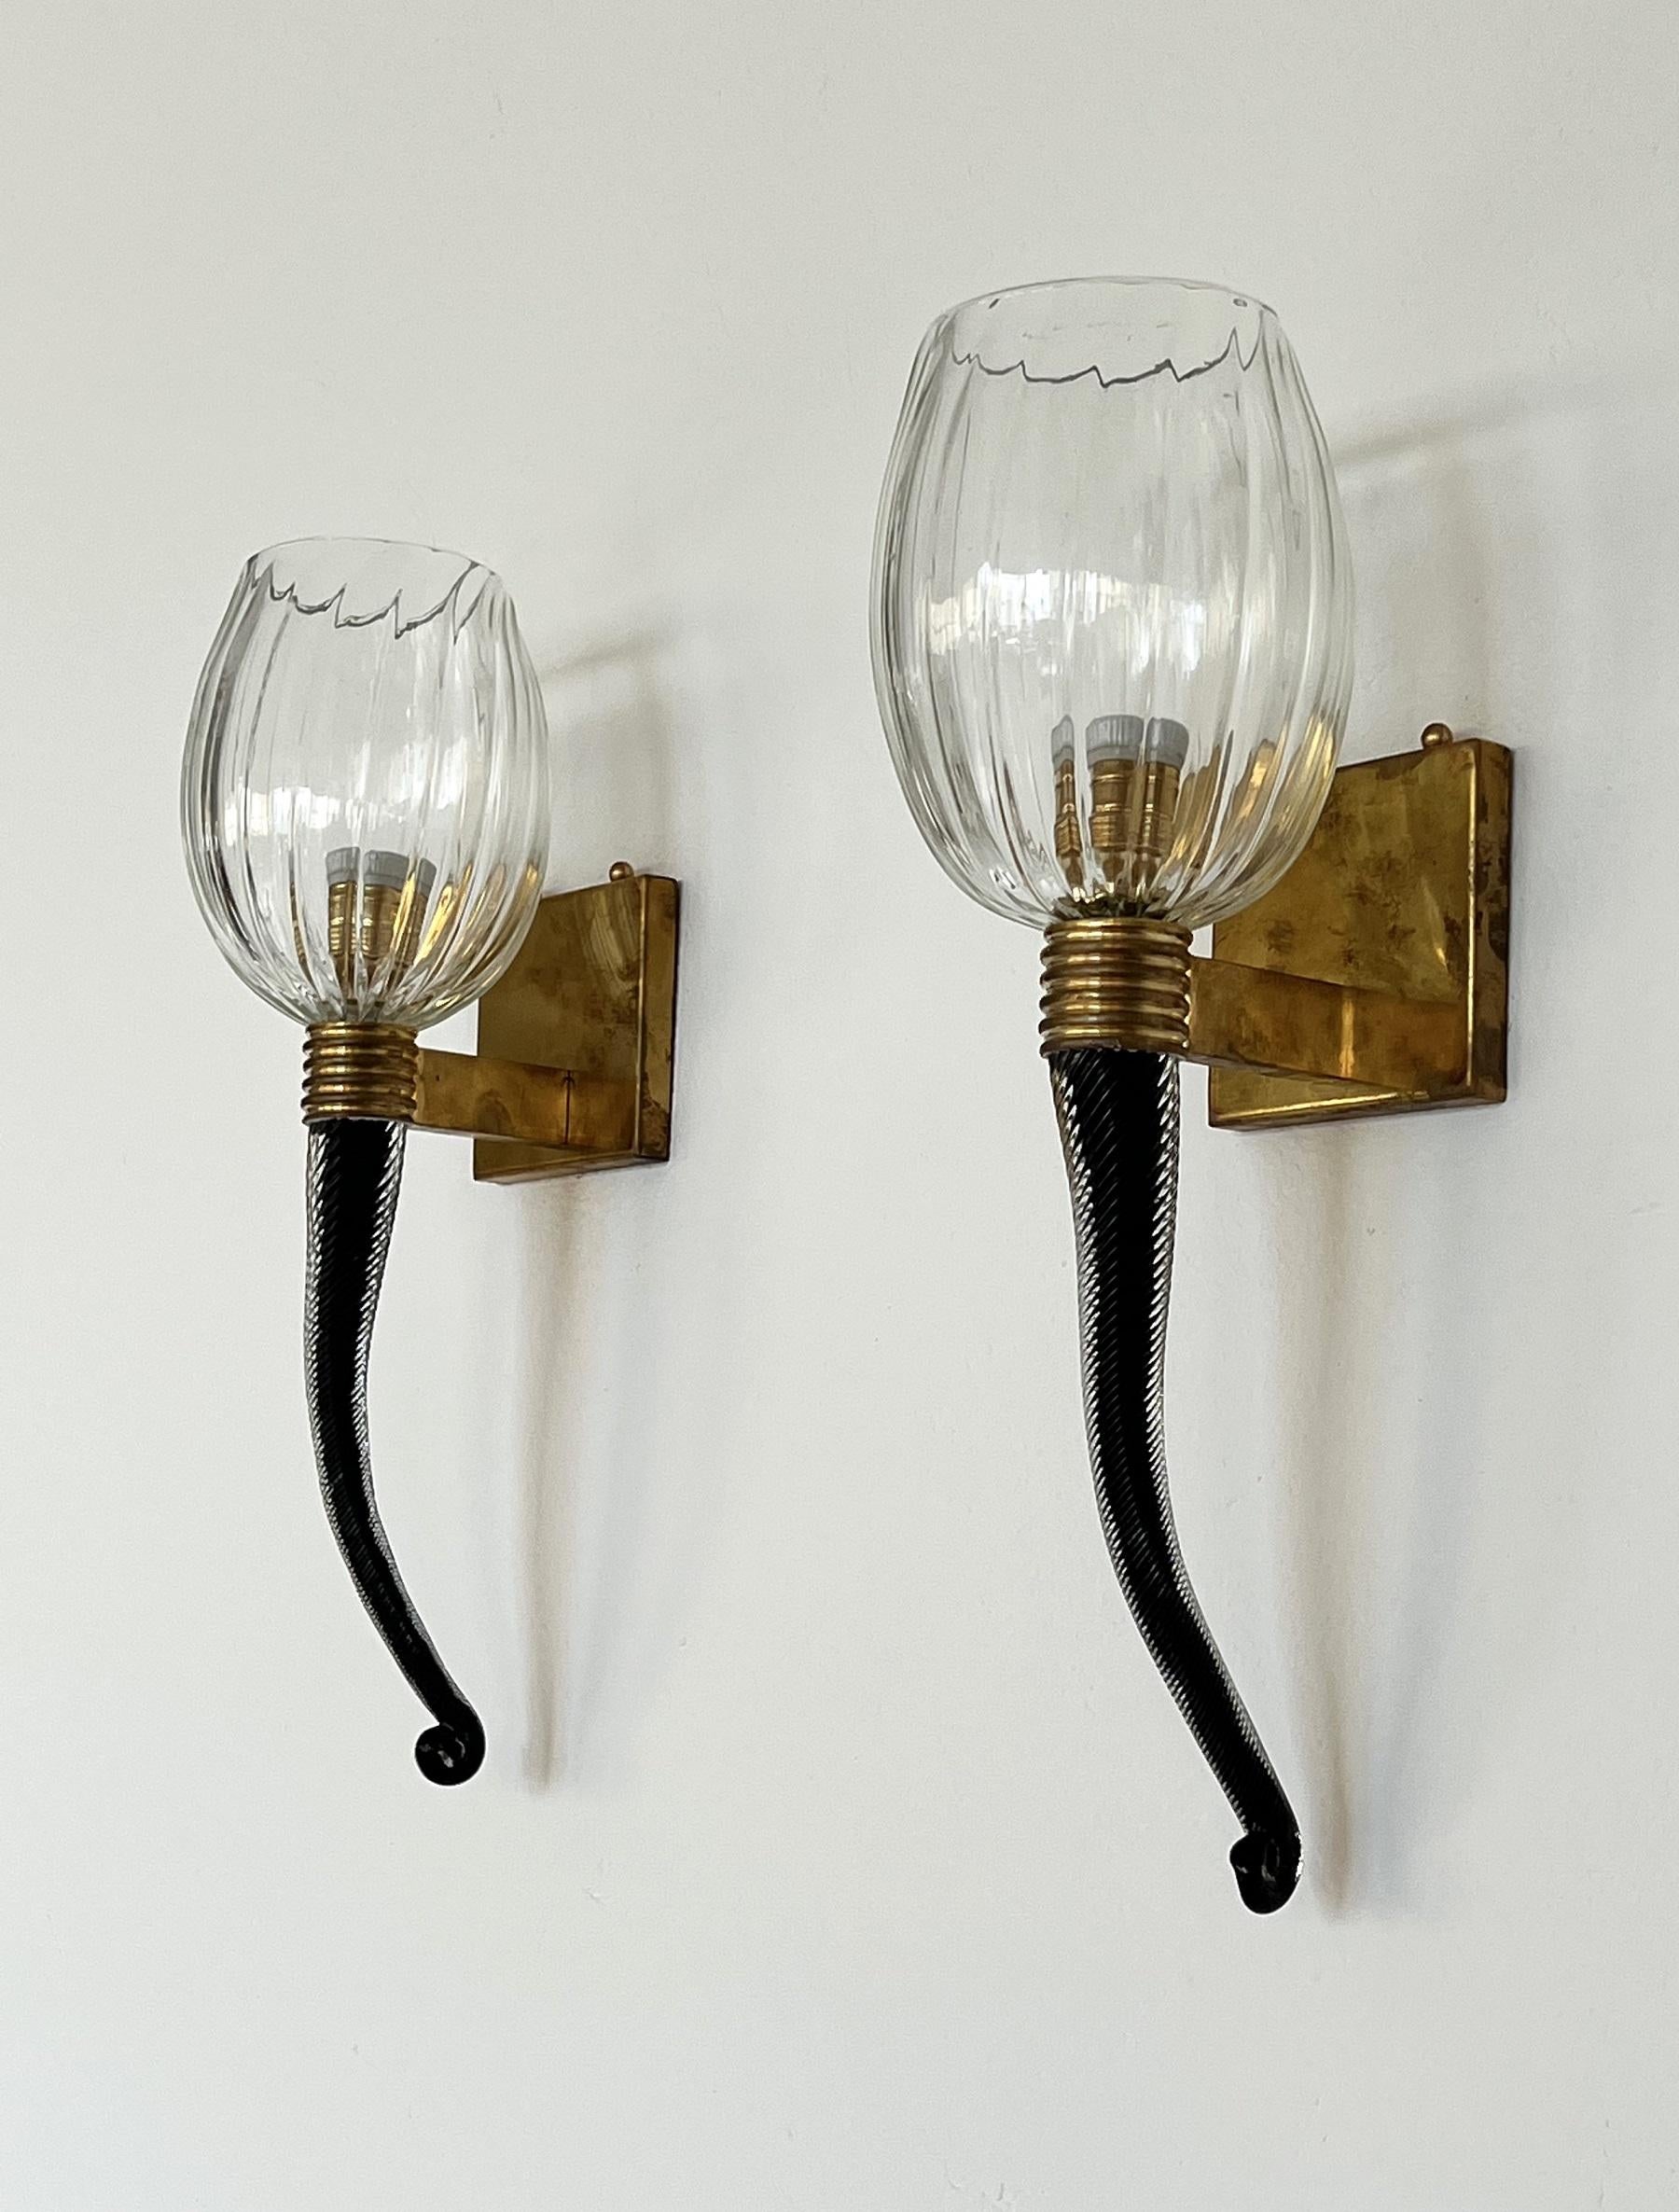 Hand-Crafted Italian Large Murano Glass Wall Lights or Sconces in Barovier Toso Style, 1990s For Sale